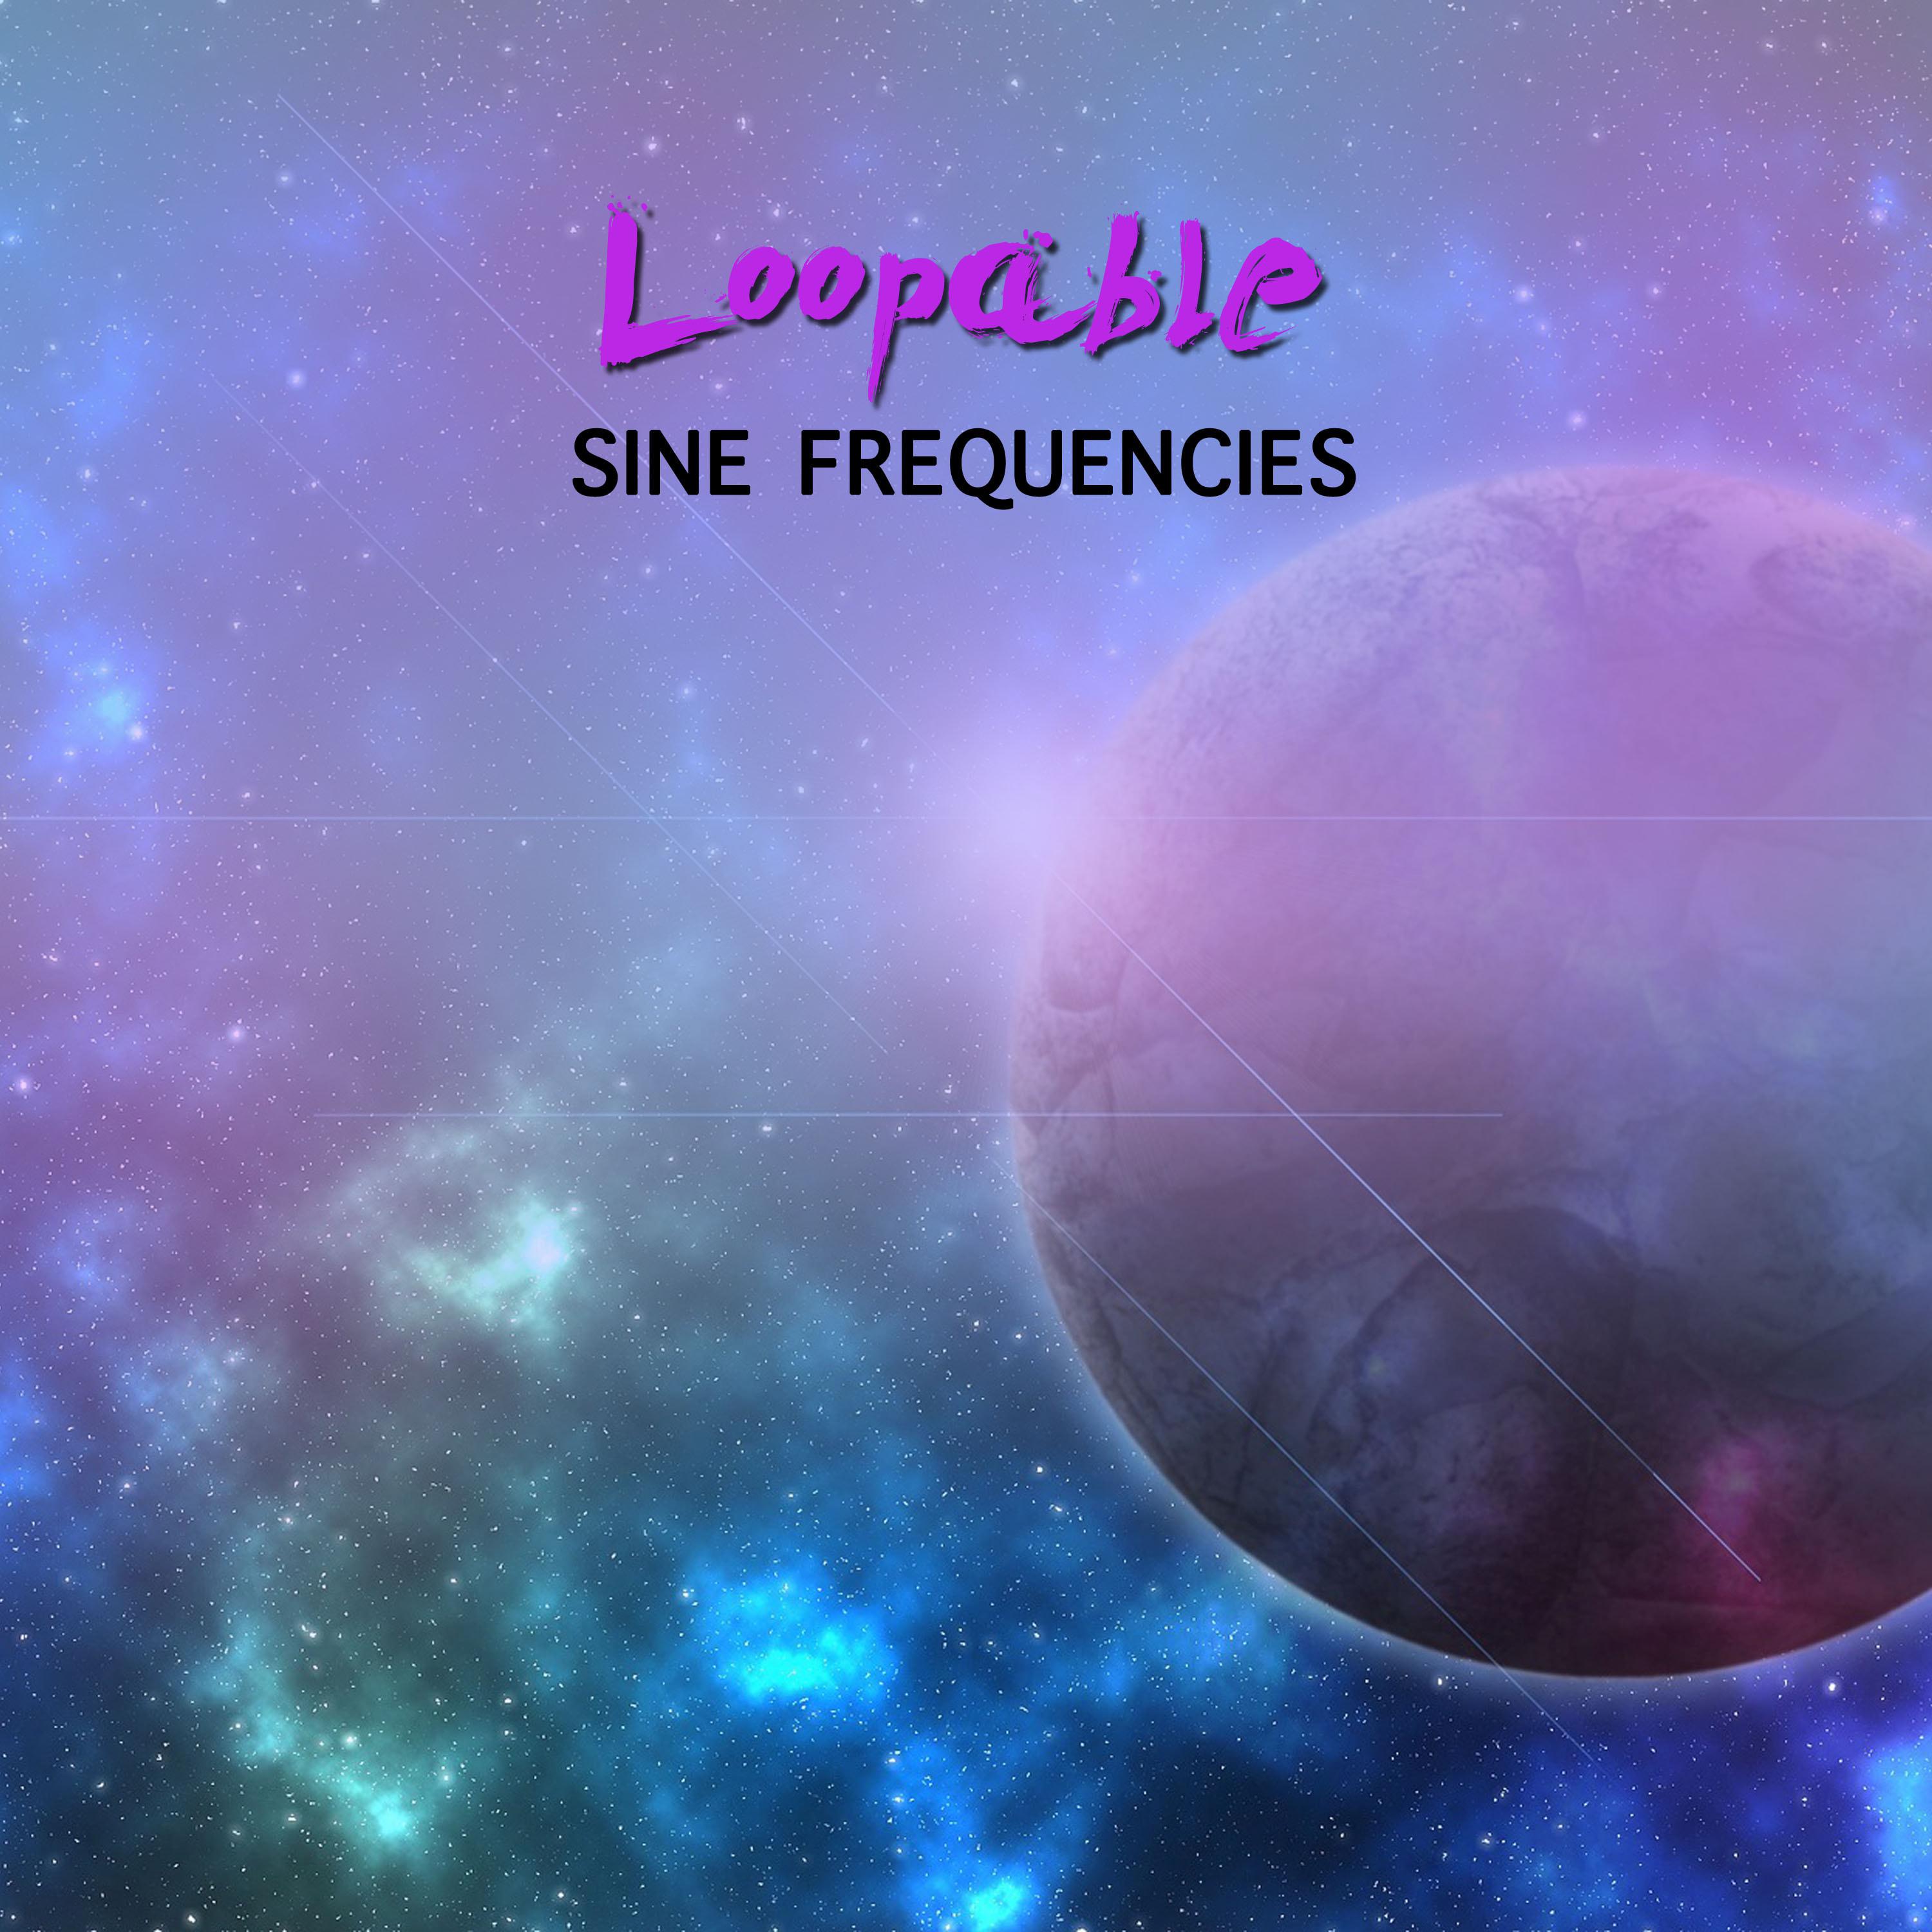 #12 Loopable Sine Frequencies